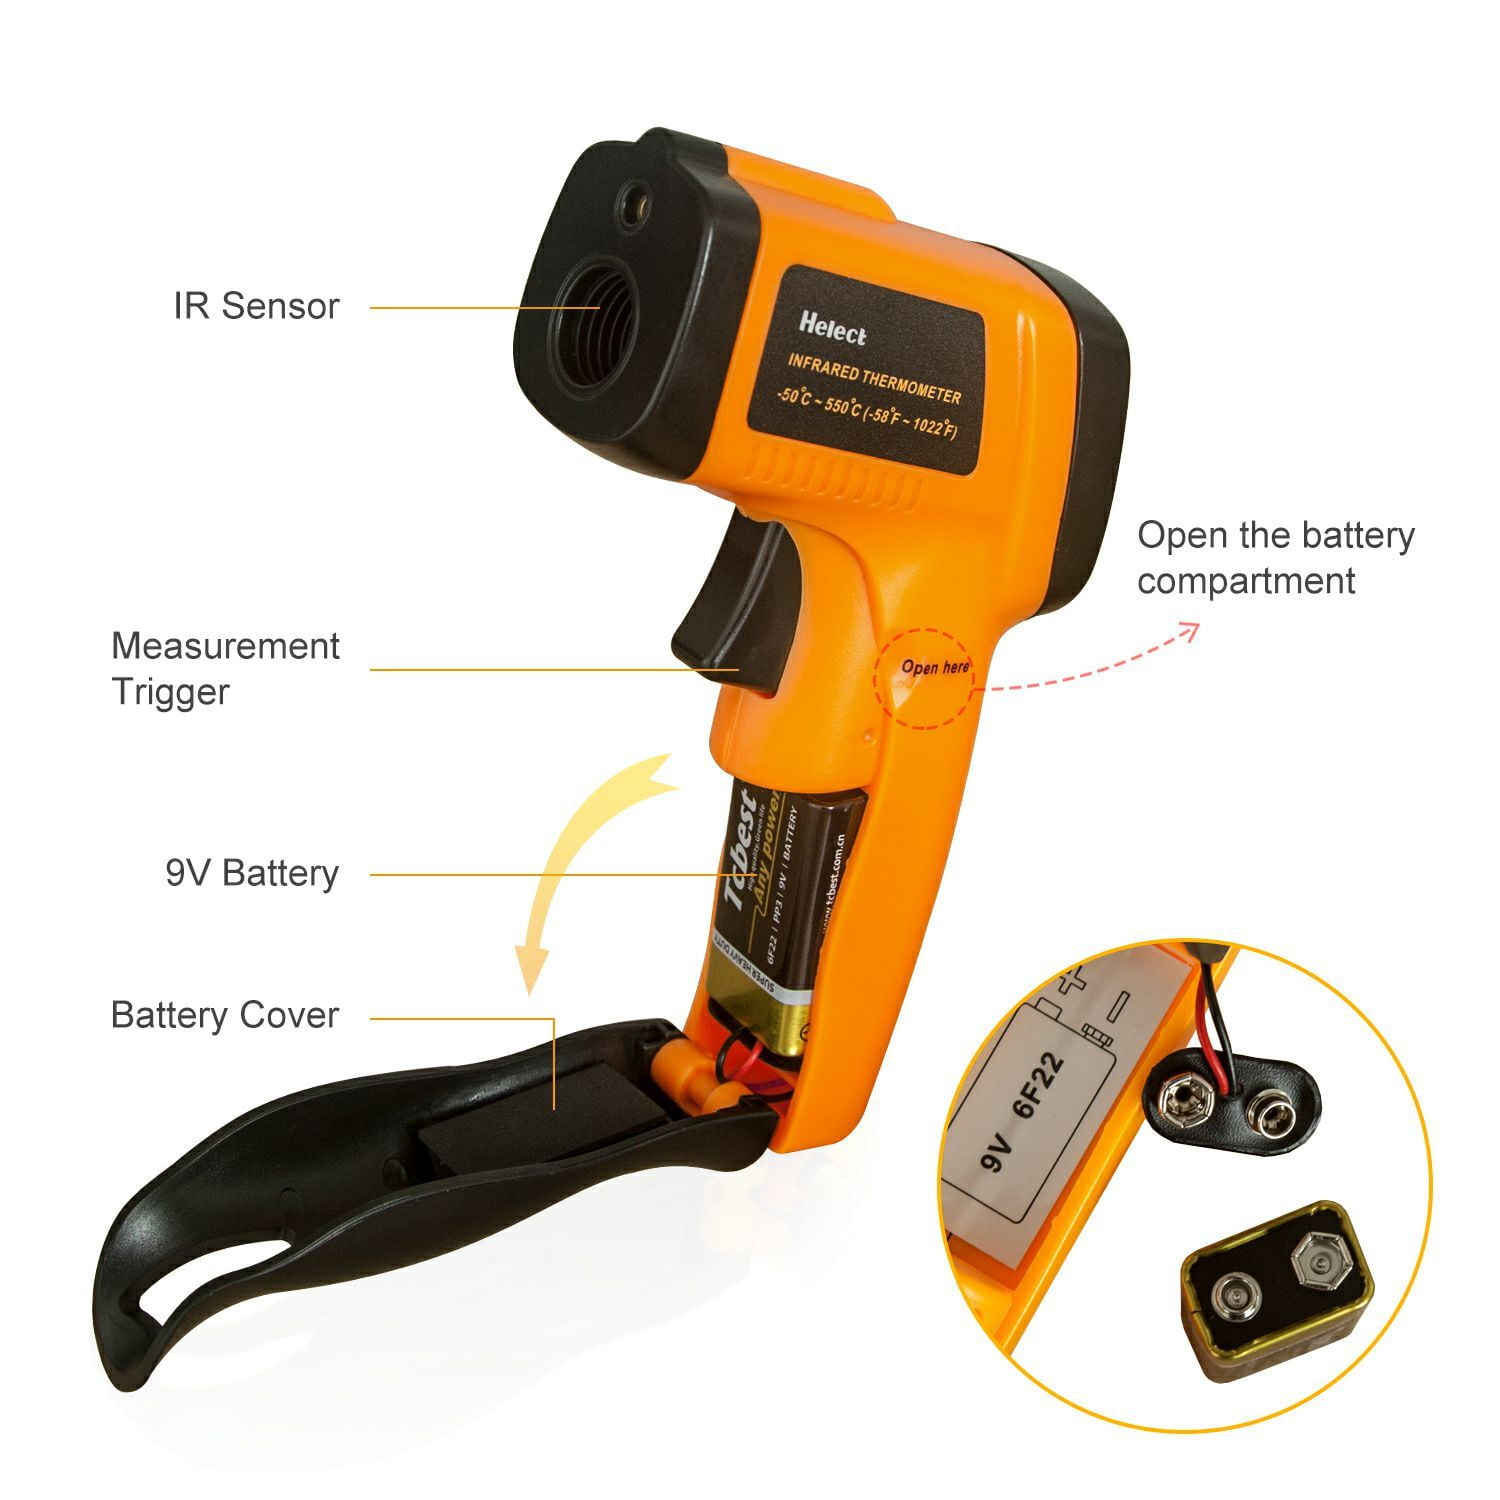  Infrared Thermometer Gun, Handheld Digital Laser Temperature Gun  57°F ~1022°F (-50°C ~ 550°C) with Battery and Newest Laser Positioning for  Cooking, Pizza Oven, Grill & Engine : Industrial & Scientific